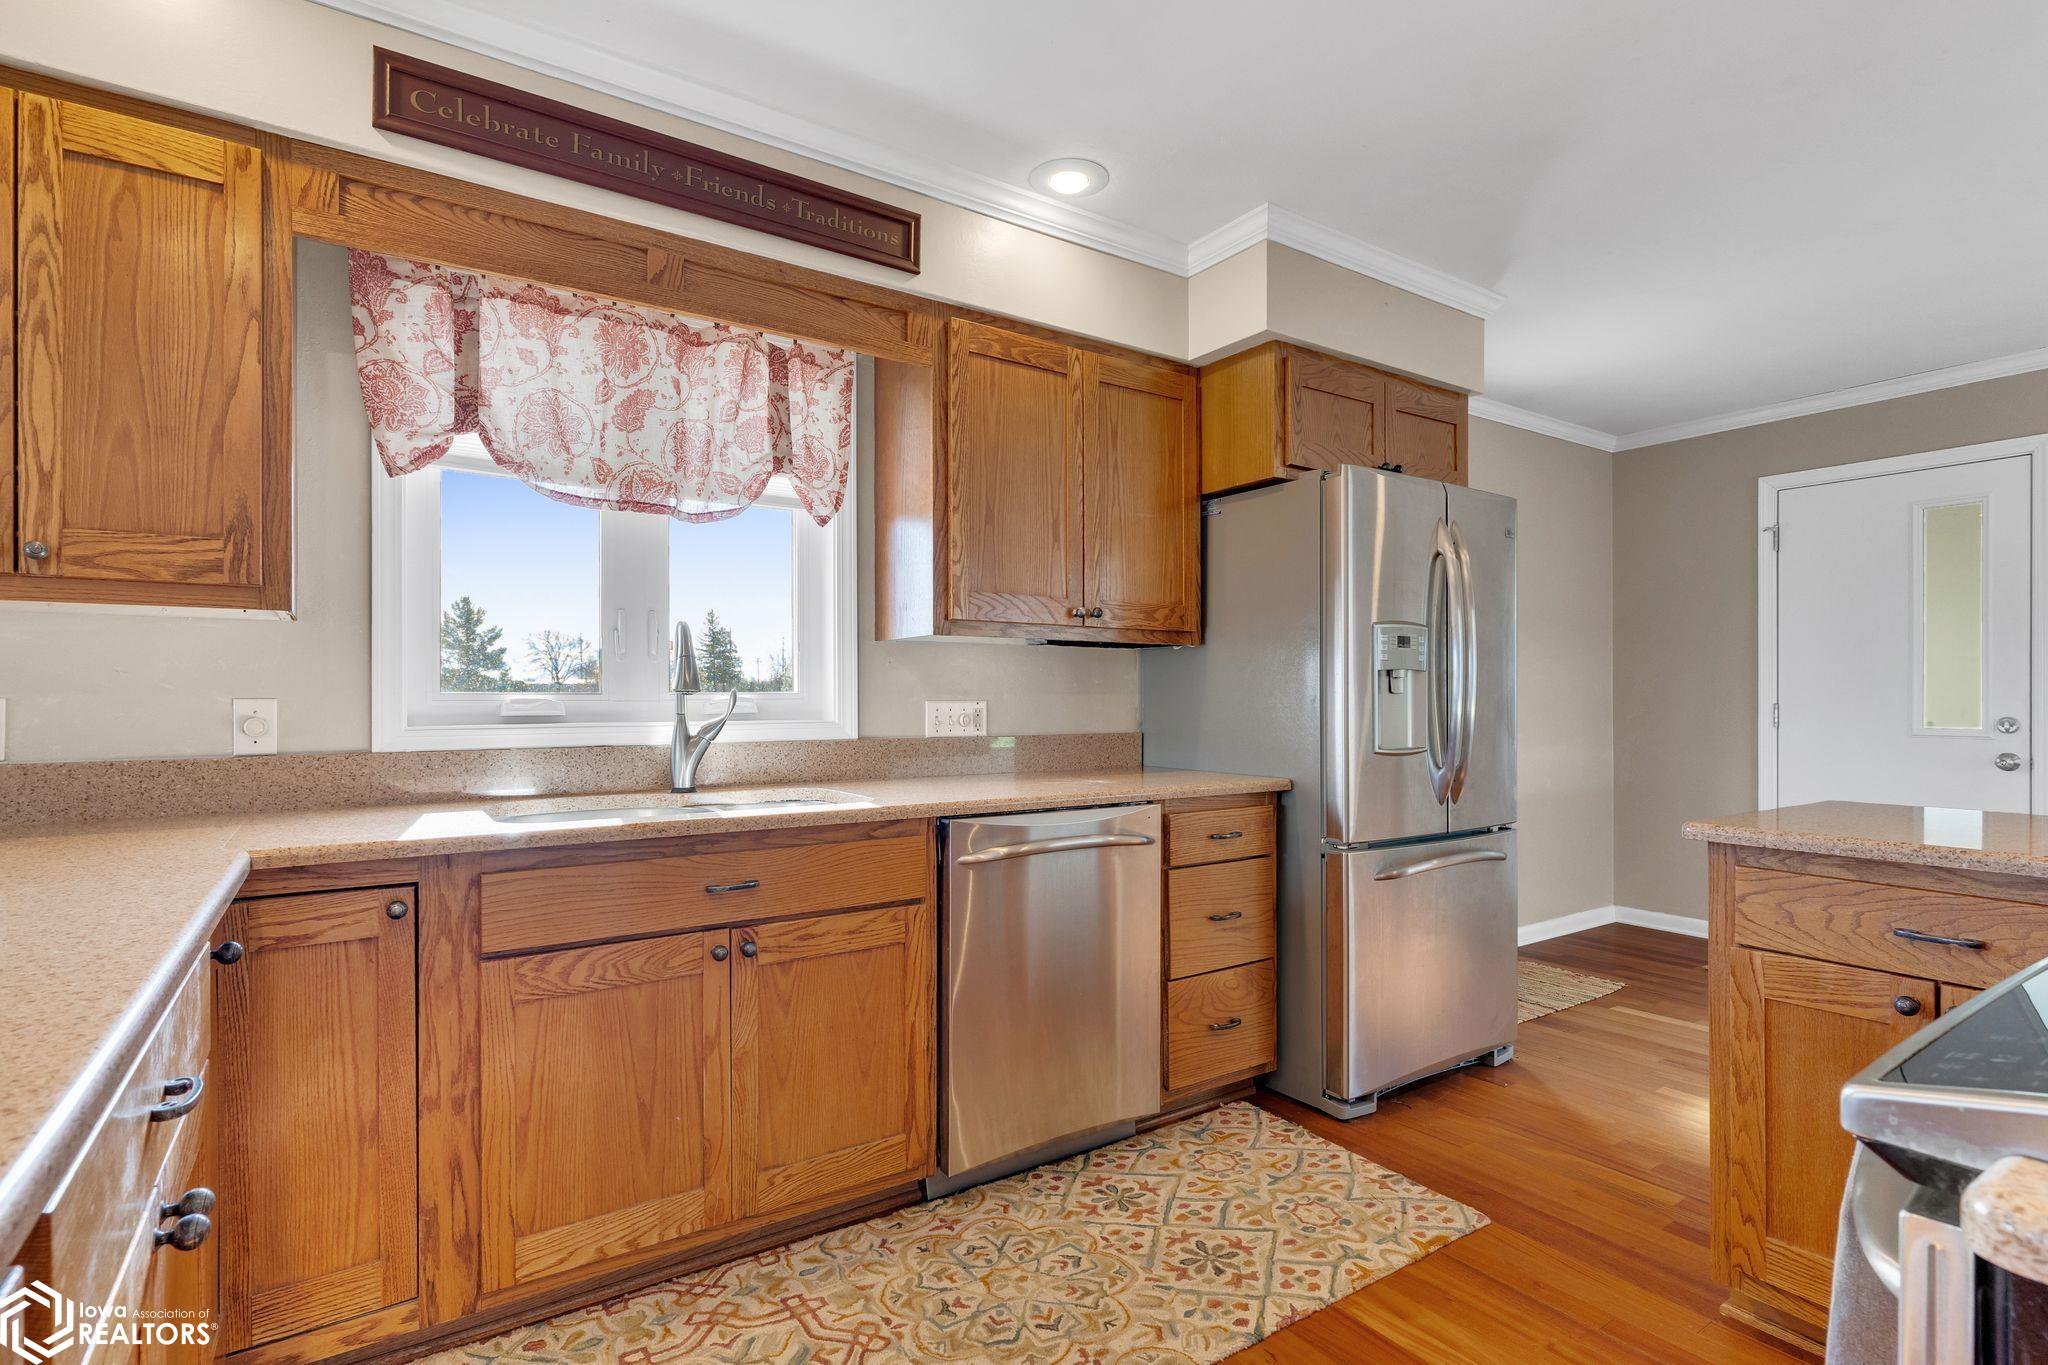 Kitchen featuring granite countertops and stainless steel appliances